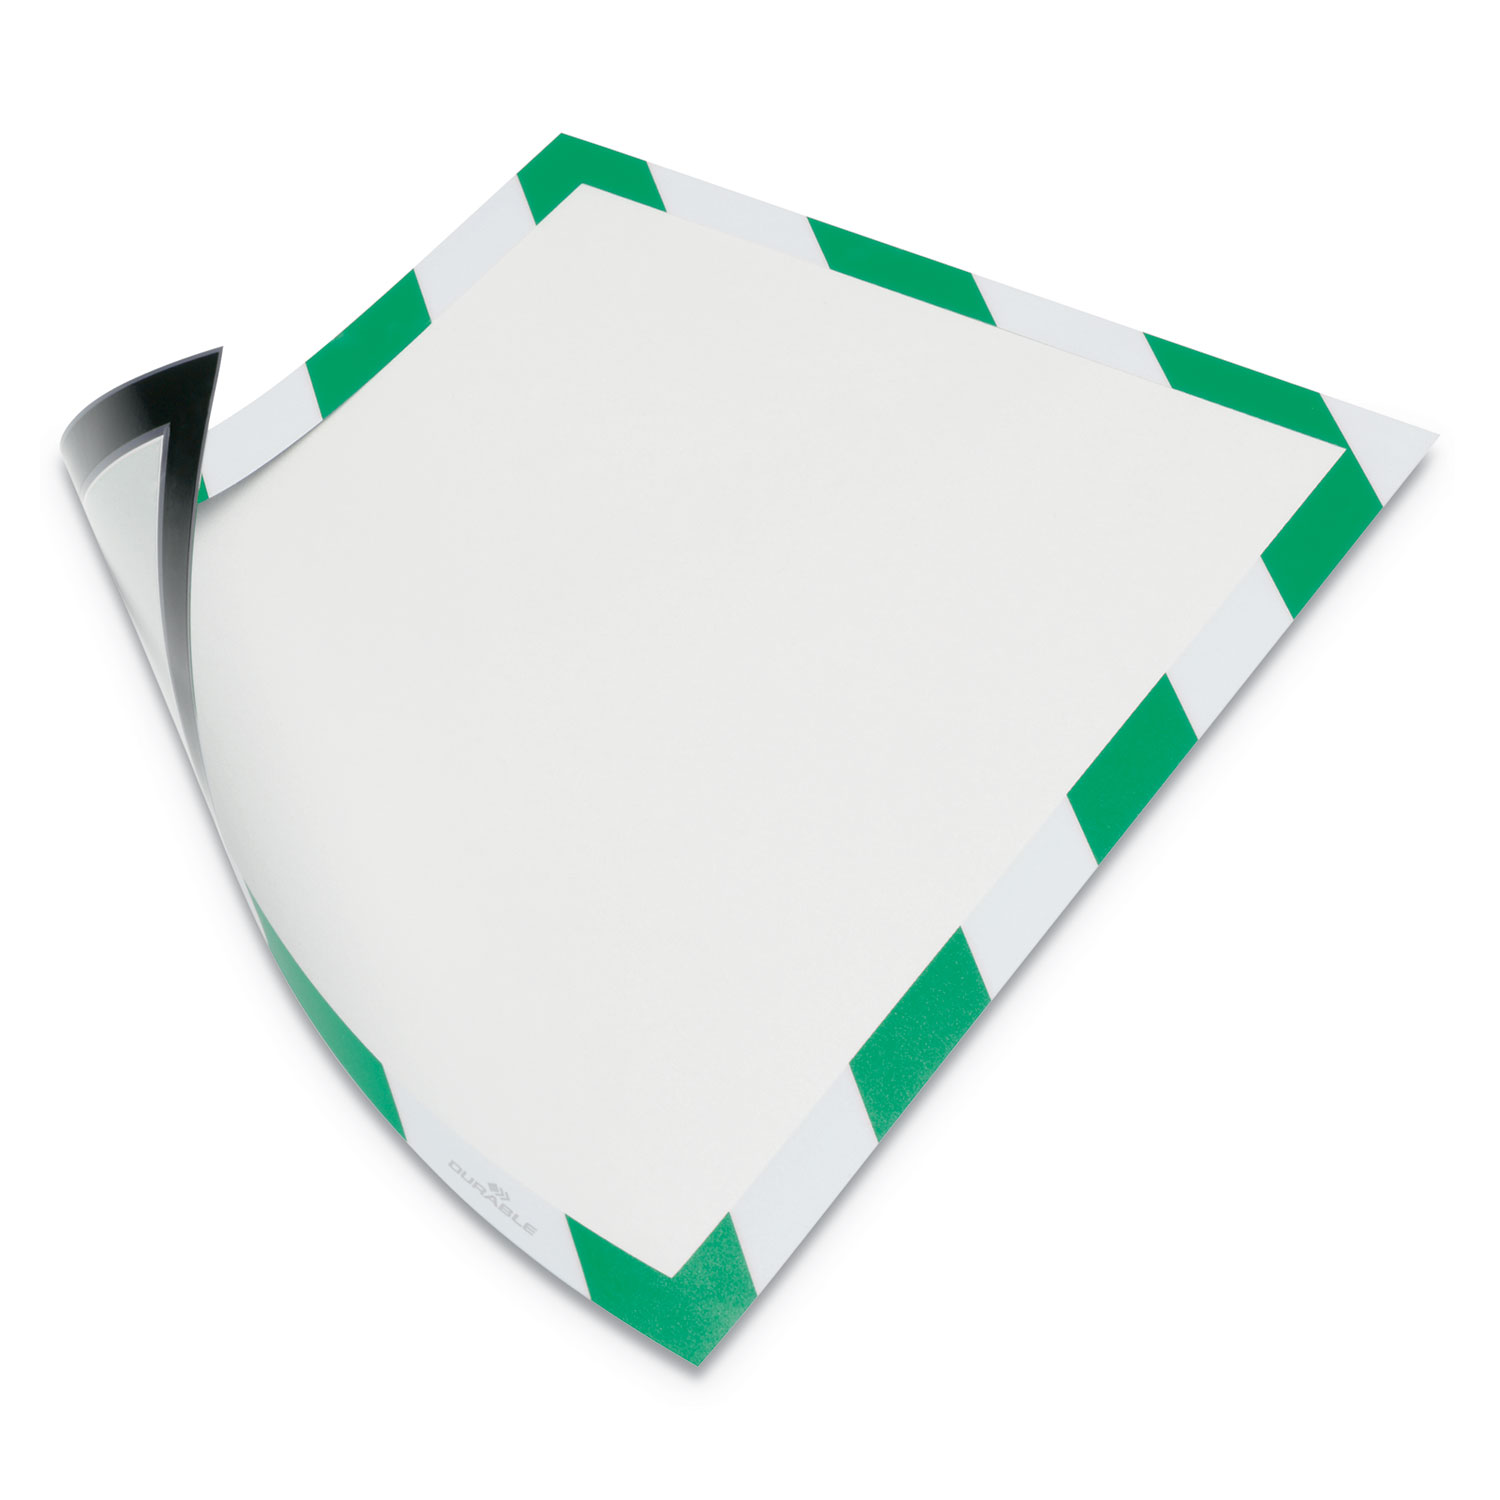  Durable 4772131 DURAFRAME Security Magnetic Sign Holder, 8 1/2 x 11, Green/White Frame, 2/Pack (DBL4772131) 